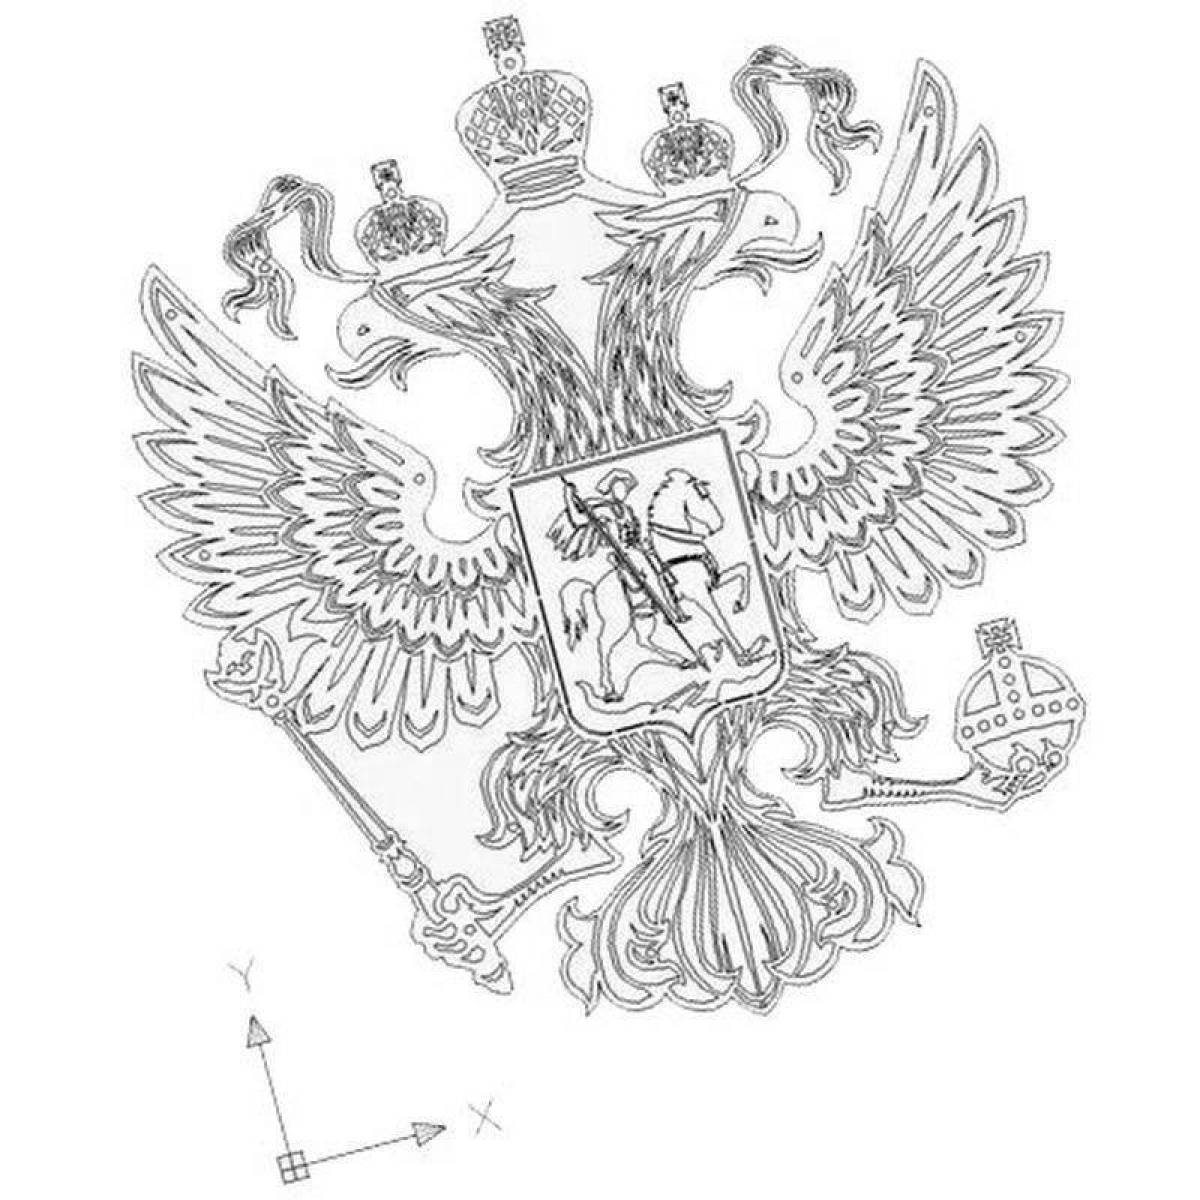 Luminous flag and coat of arms of Russia